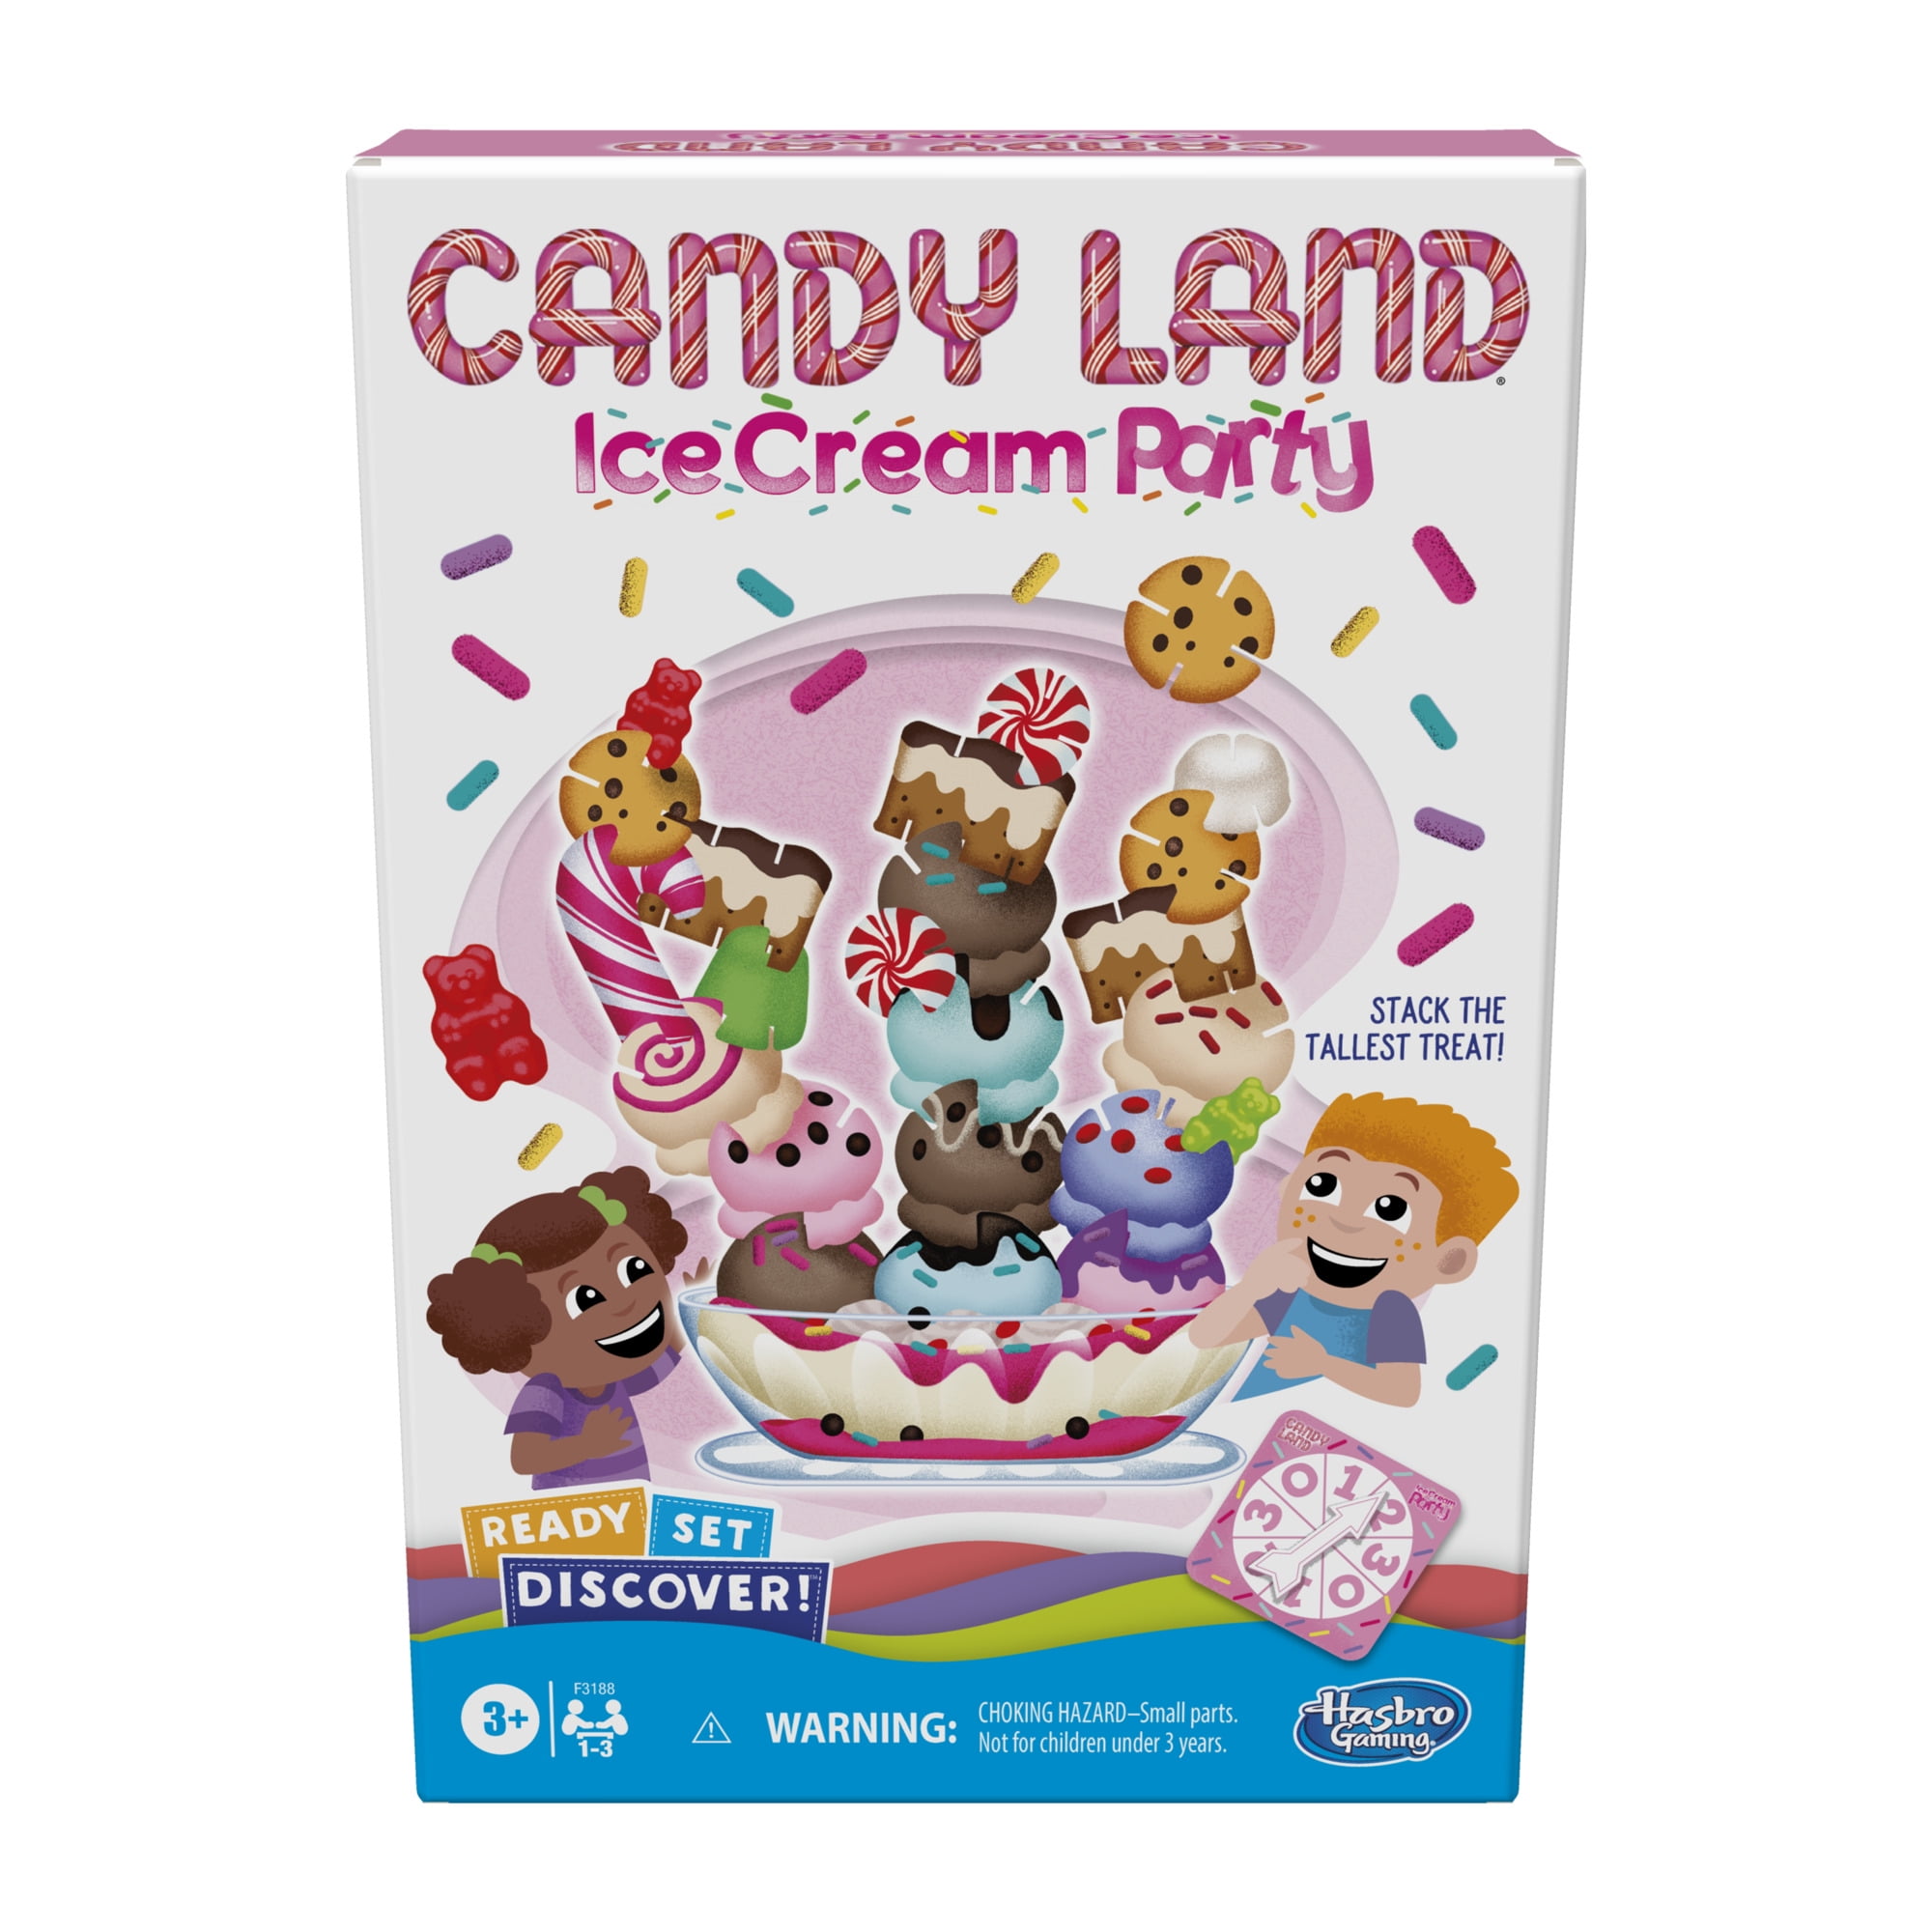 play hasbro candy land board game online